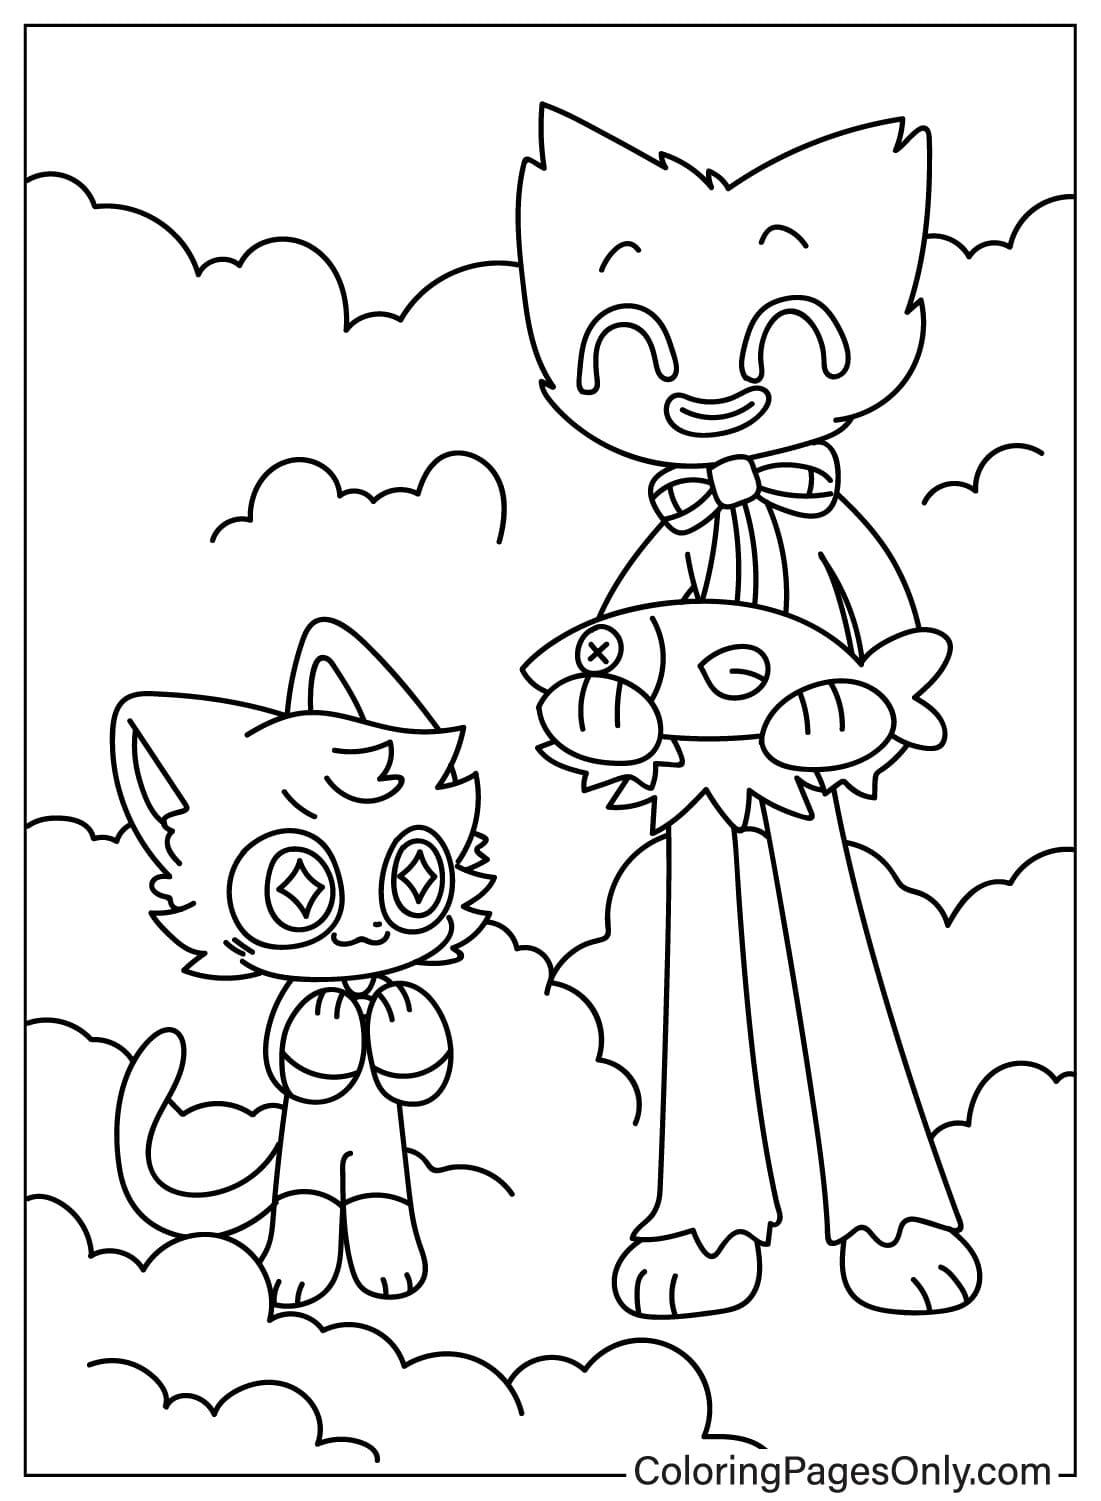 CatNap and Huggy Wuggy Coloring Page Coloring Page